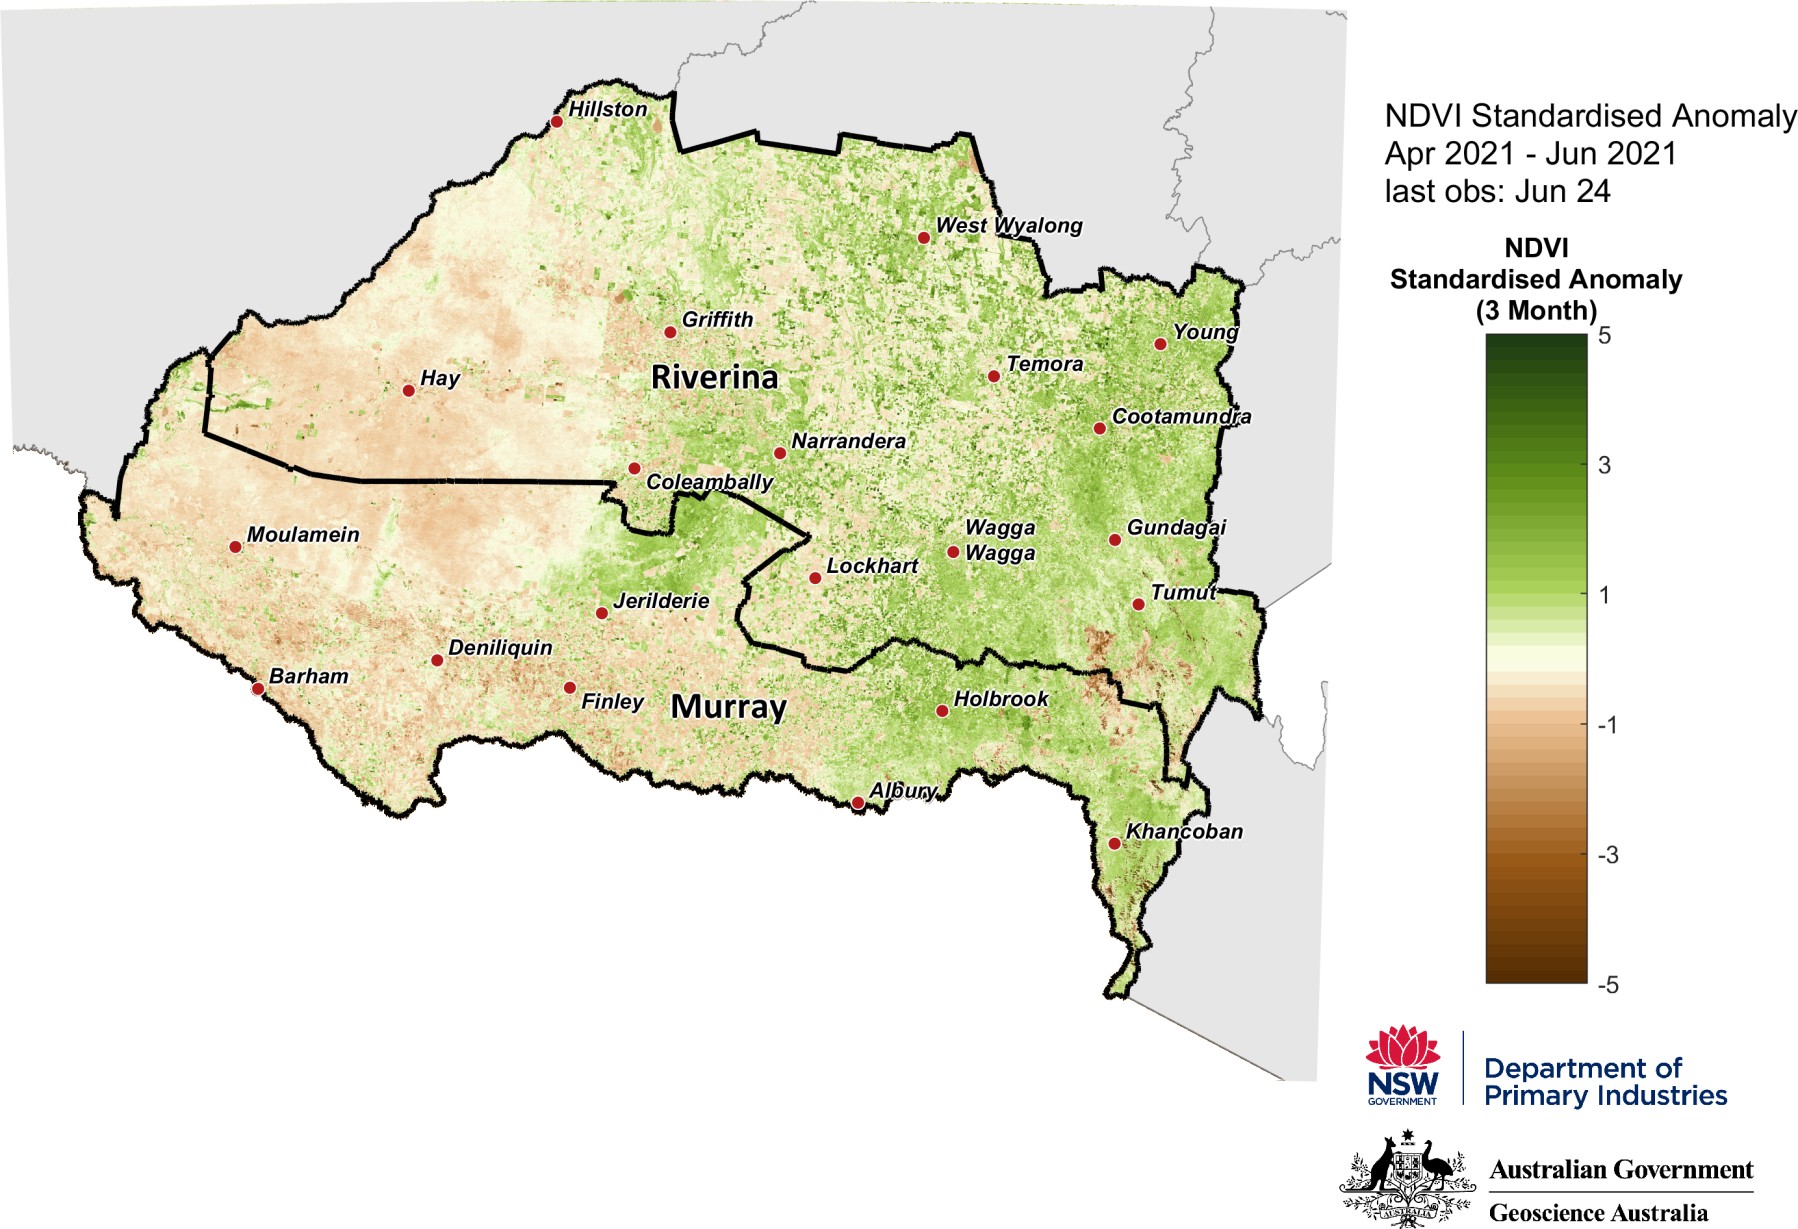 NDVI anomaly map for the Murray and Riverina LLS regions